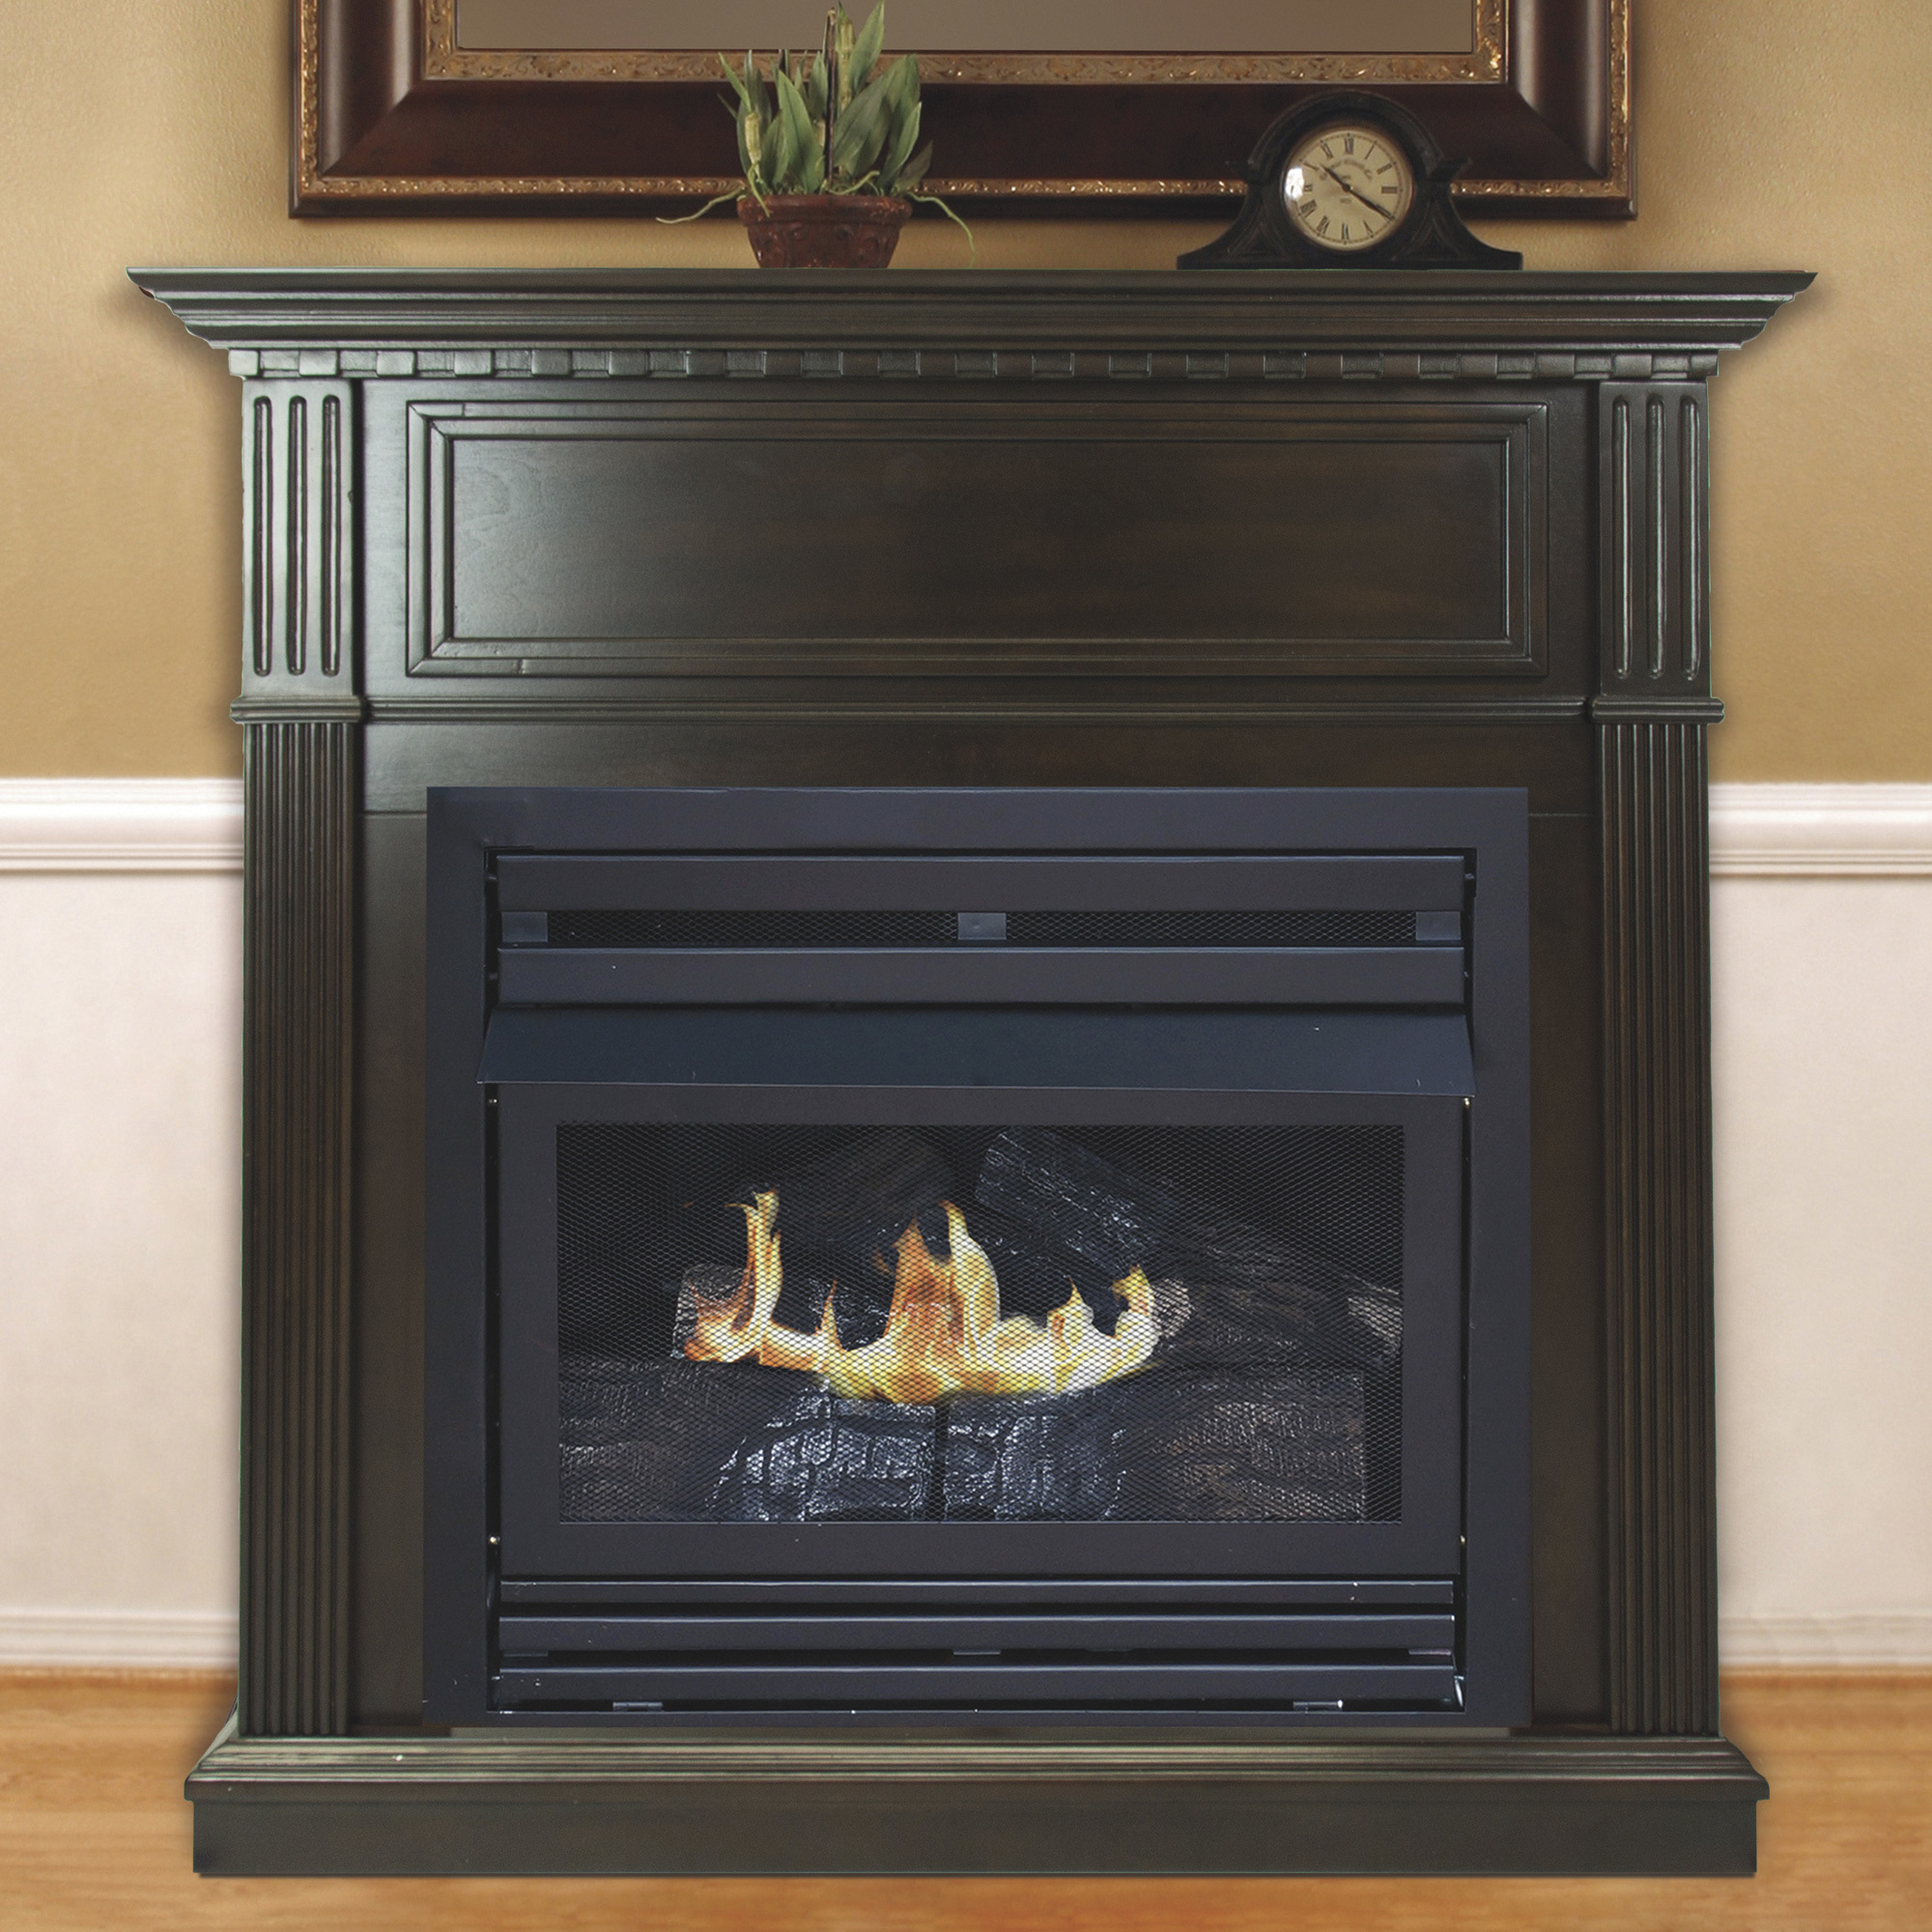 Pleasant Hearth Vent-Free Fireplace, 27,500 BTU, 42Inch, Natural Gas, Tobacco Finish, Model VFF-PH26NG-T1